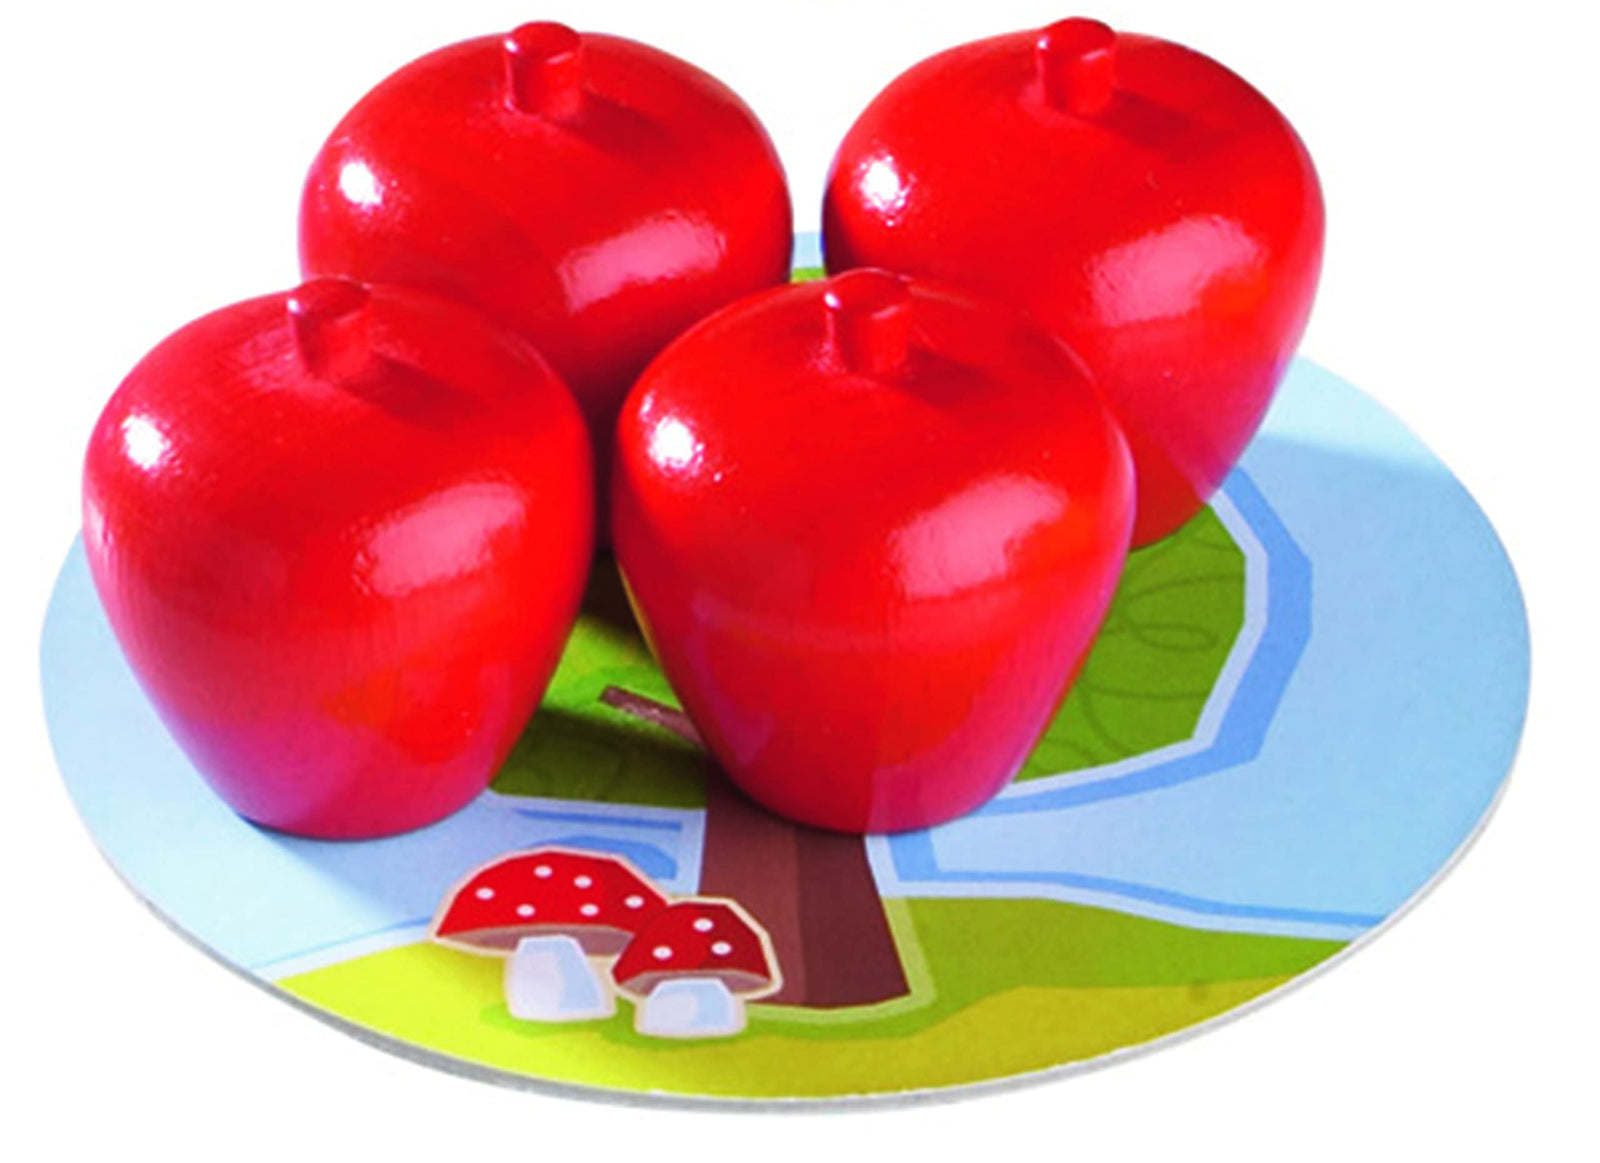 HABA My Very First Games - First Orchard Cooperative Board Game for 2 Year Olds (Made in Germany)